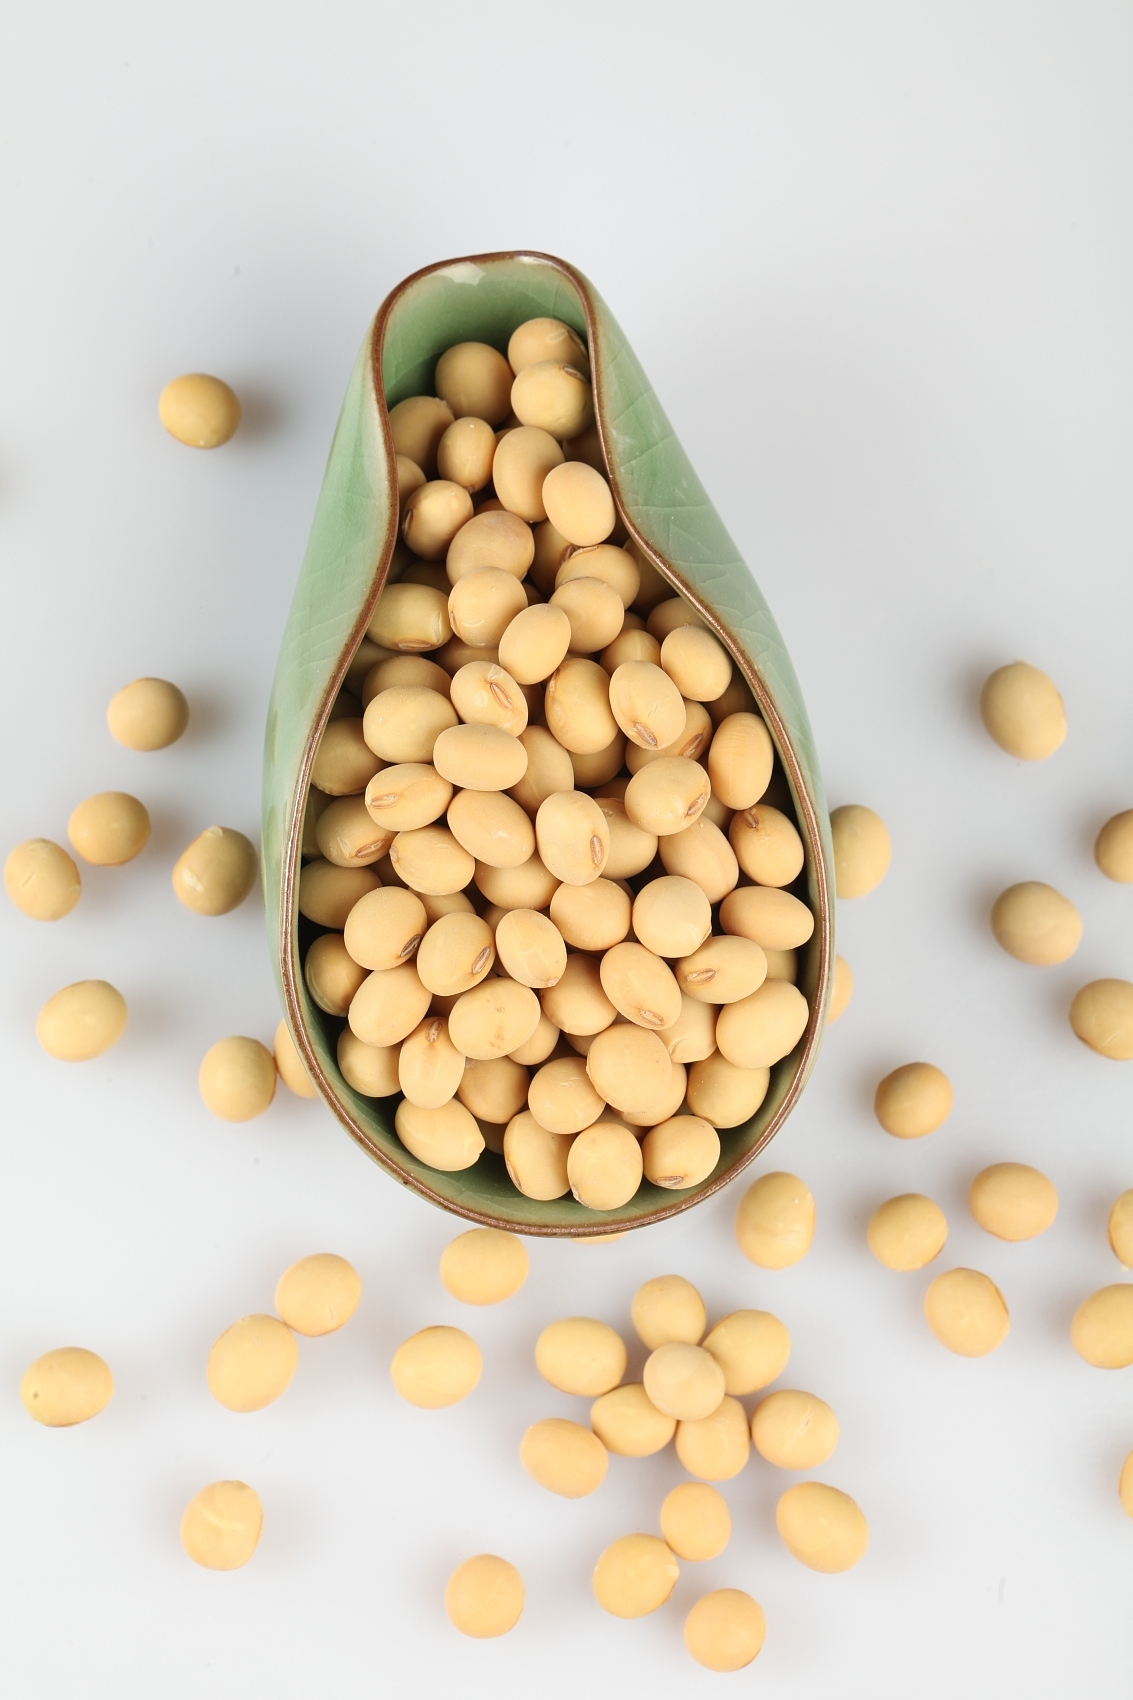 soy bean extract pure Genistein Powder5